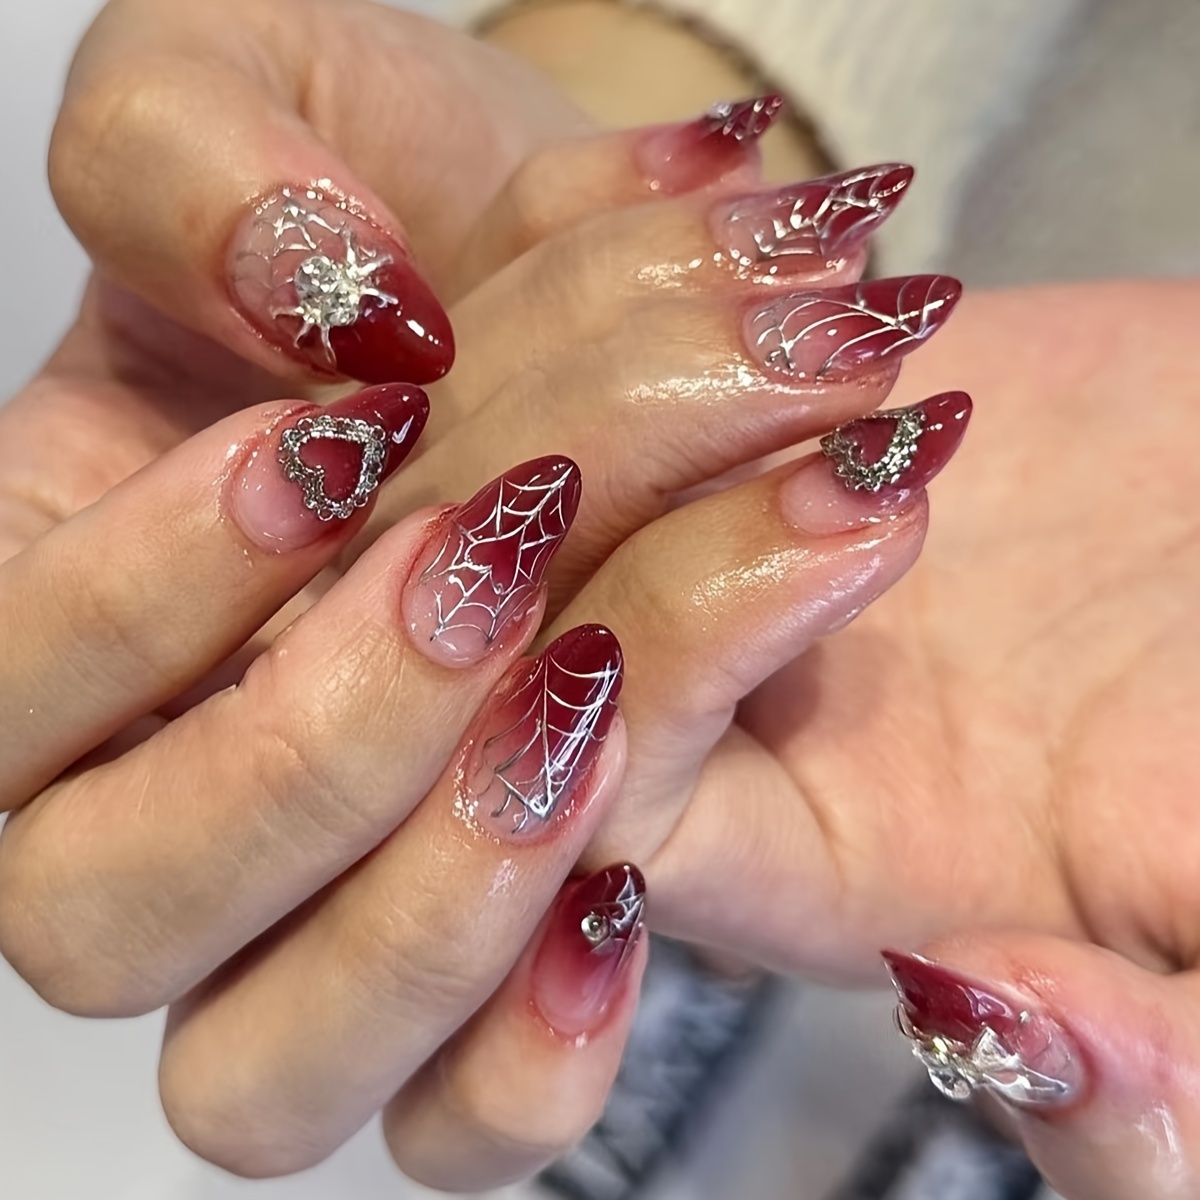 

24pcs Gradient Red Wearable Nail Art Set, Silvery Love & Spider Design, Short Almond Shaped, Sweet Manicure Tips With Jelly Glue & Nail File Included